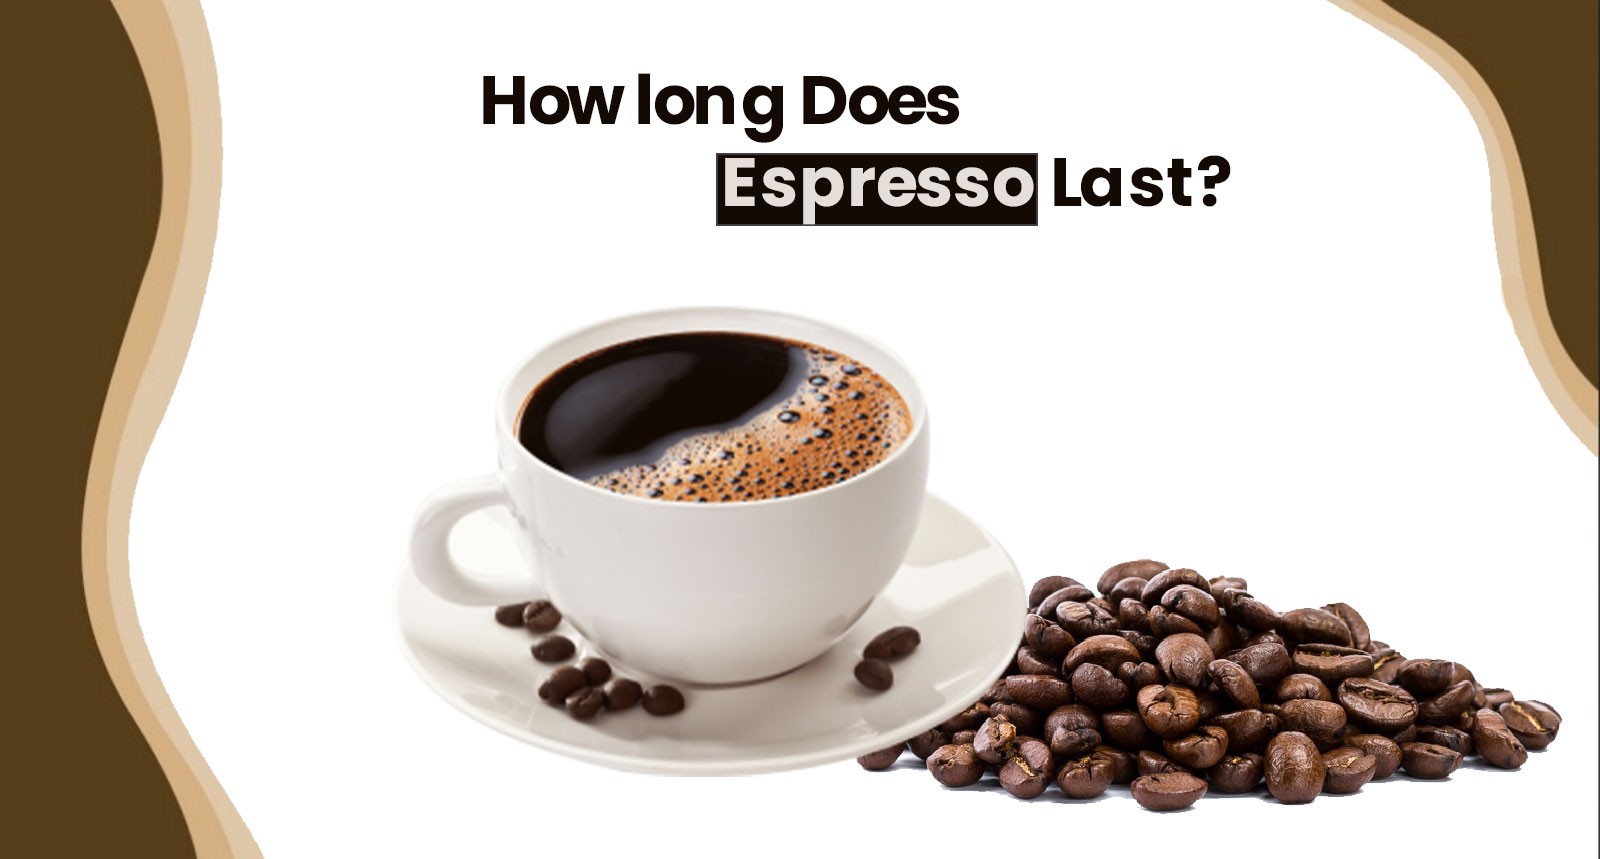 How long does espresso last?